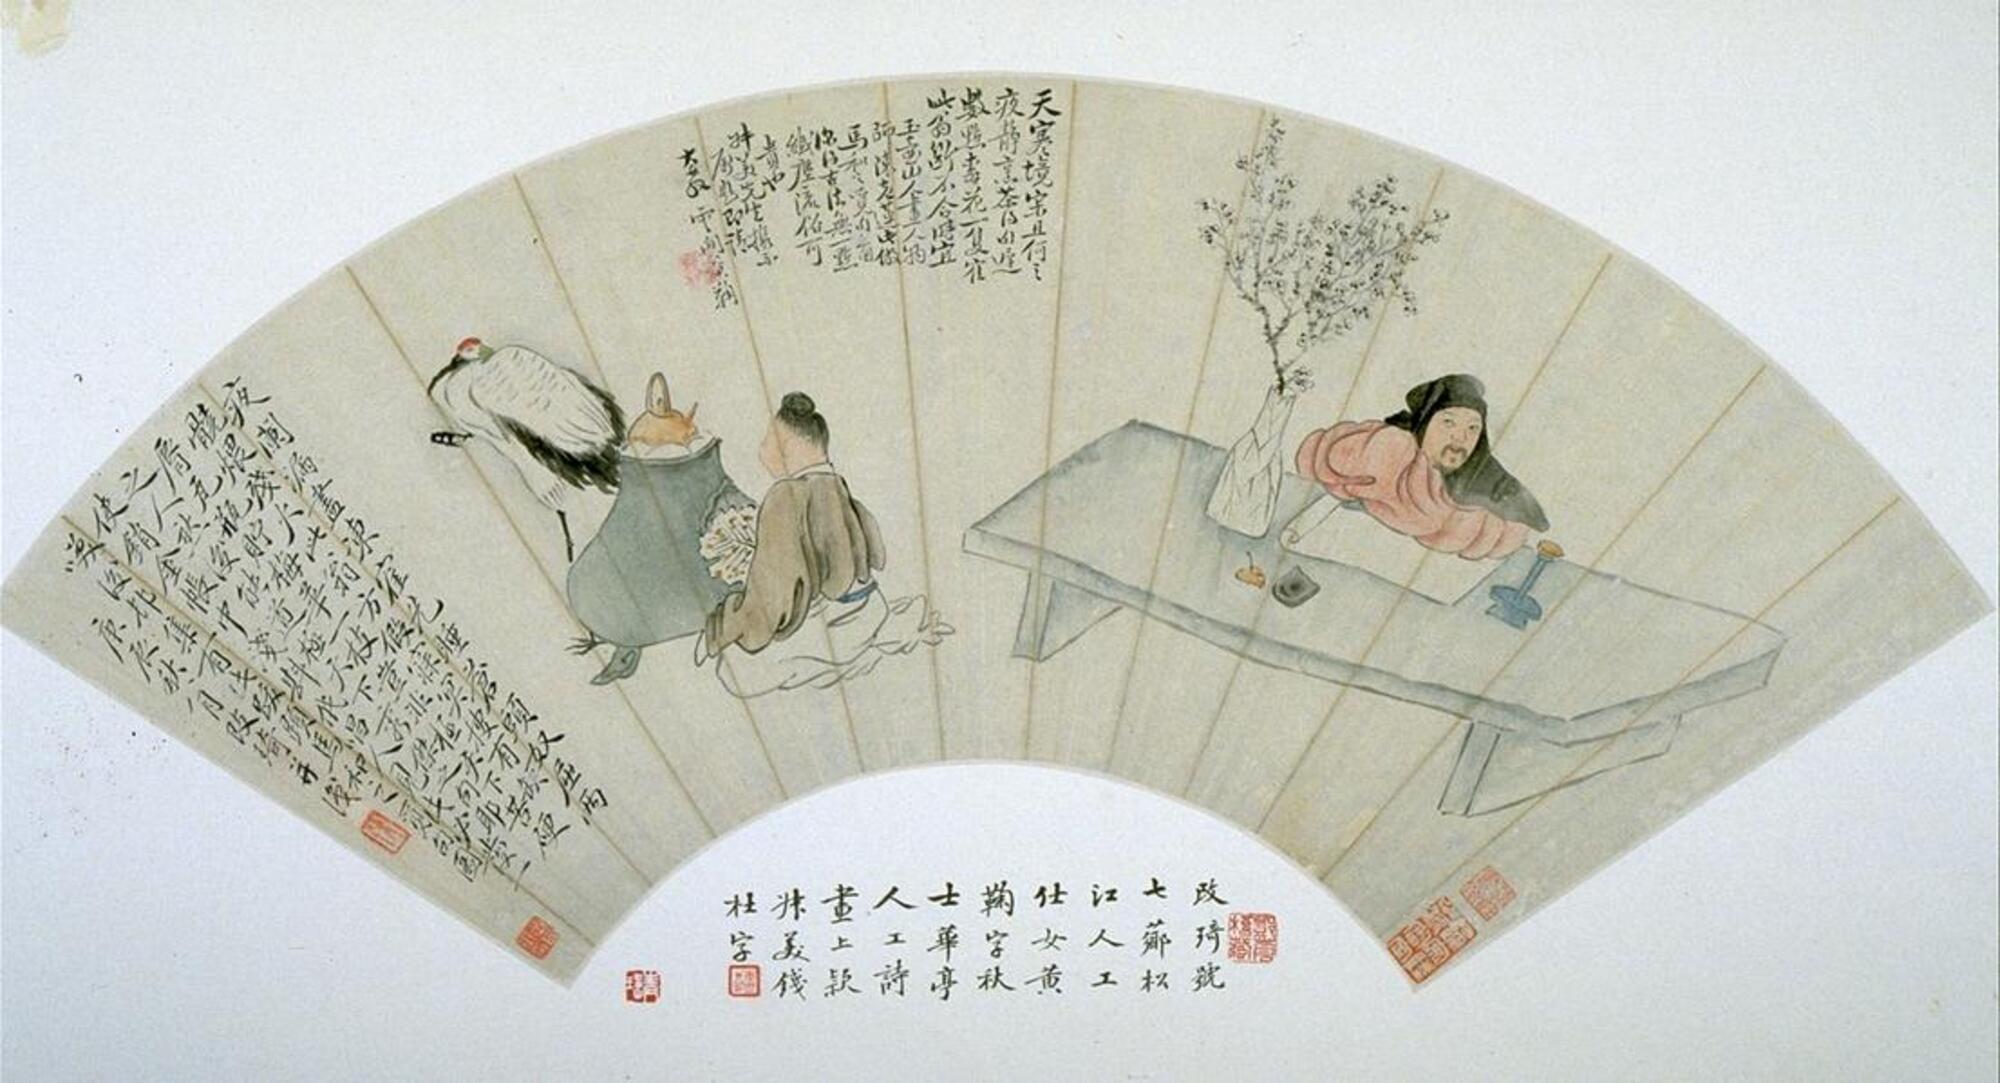 A scholar sits in a relaxed posture at his desk looking at cut plum blossoms in a white vase; before him is an empty sheet of paper and ink stone, and by his side an attendant is boiling water for tea. A crane tucks her head and leg to keep herself warm in the cold winter air. The scholar seems to be contemplating a subject to be drawn or written, perhaps related to the flowers.